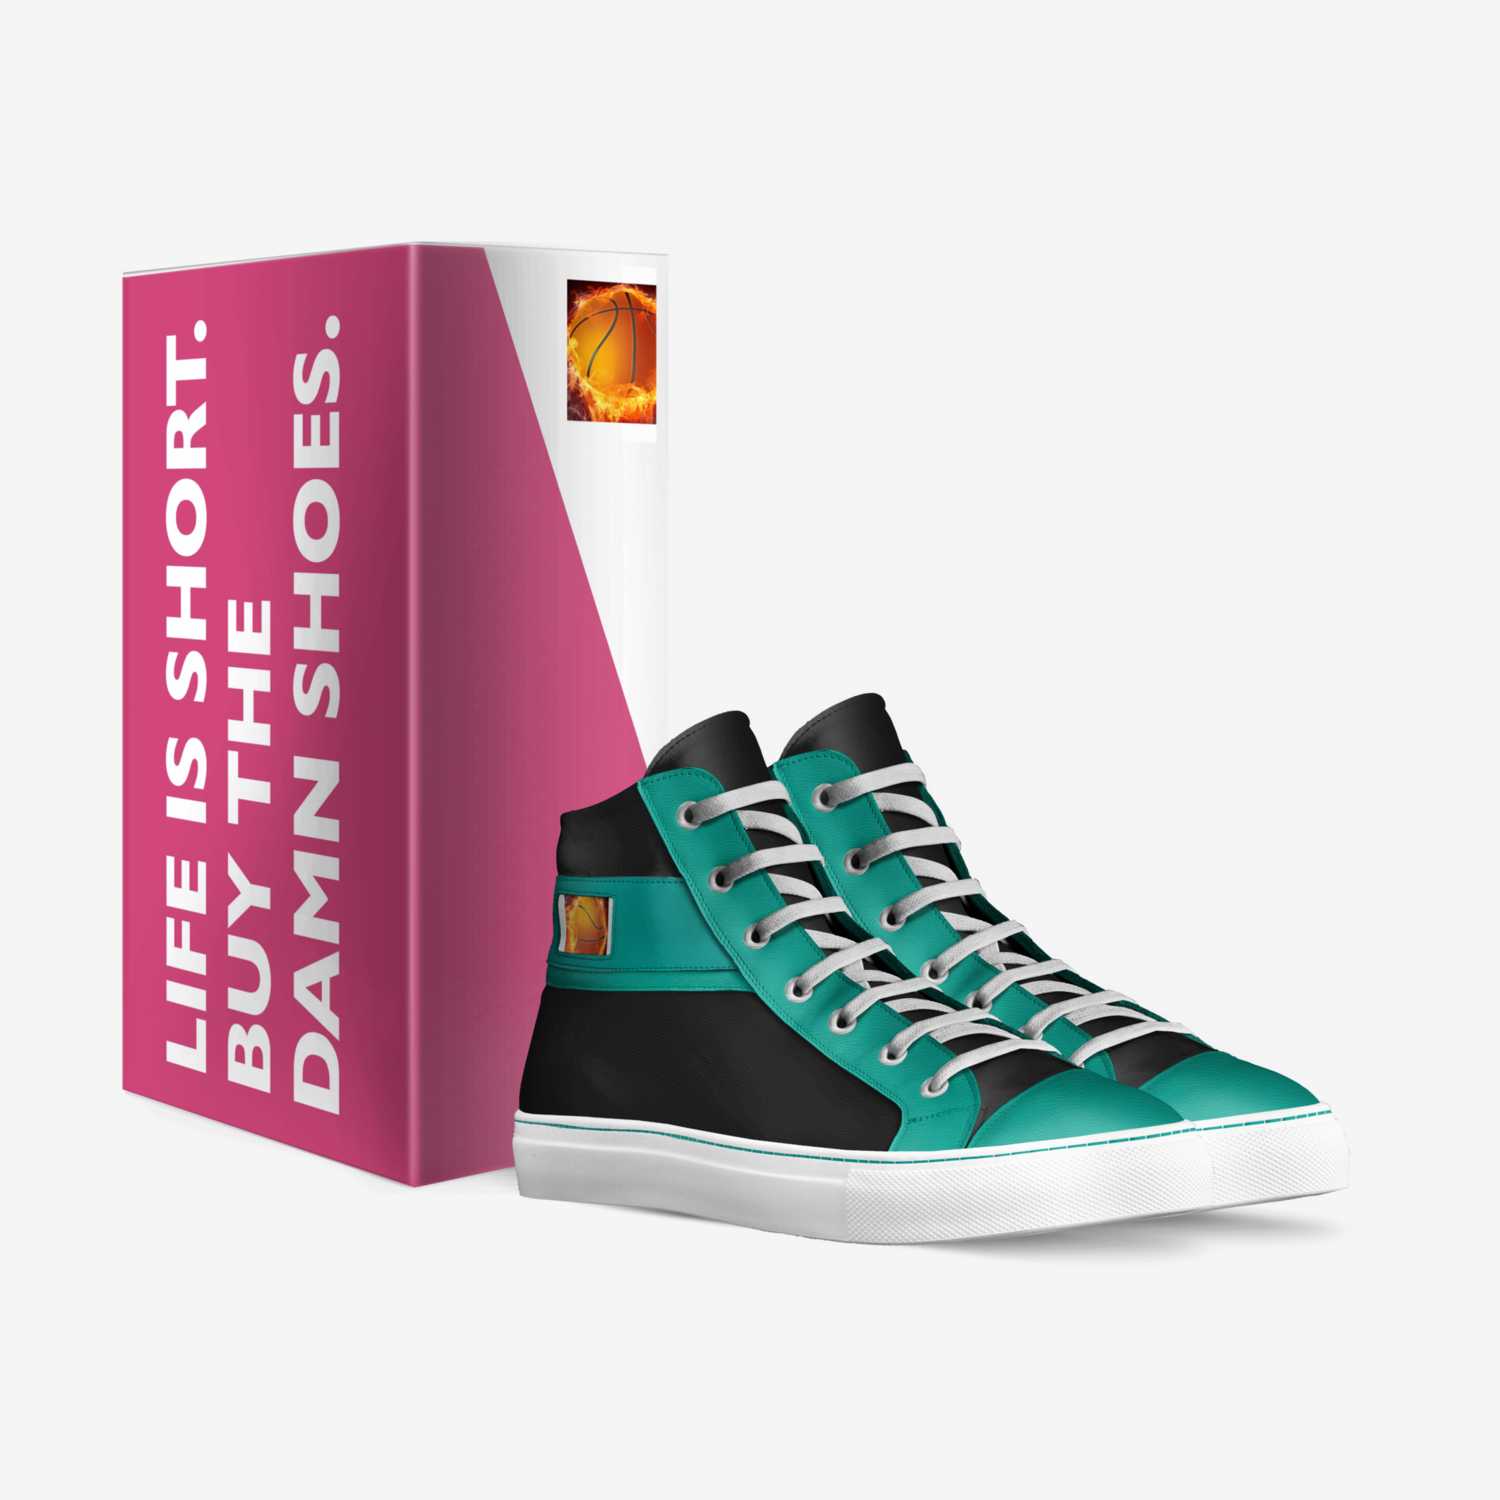 Hightops custom made in Italy shoes by Amanda'S Anderson | Box view